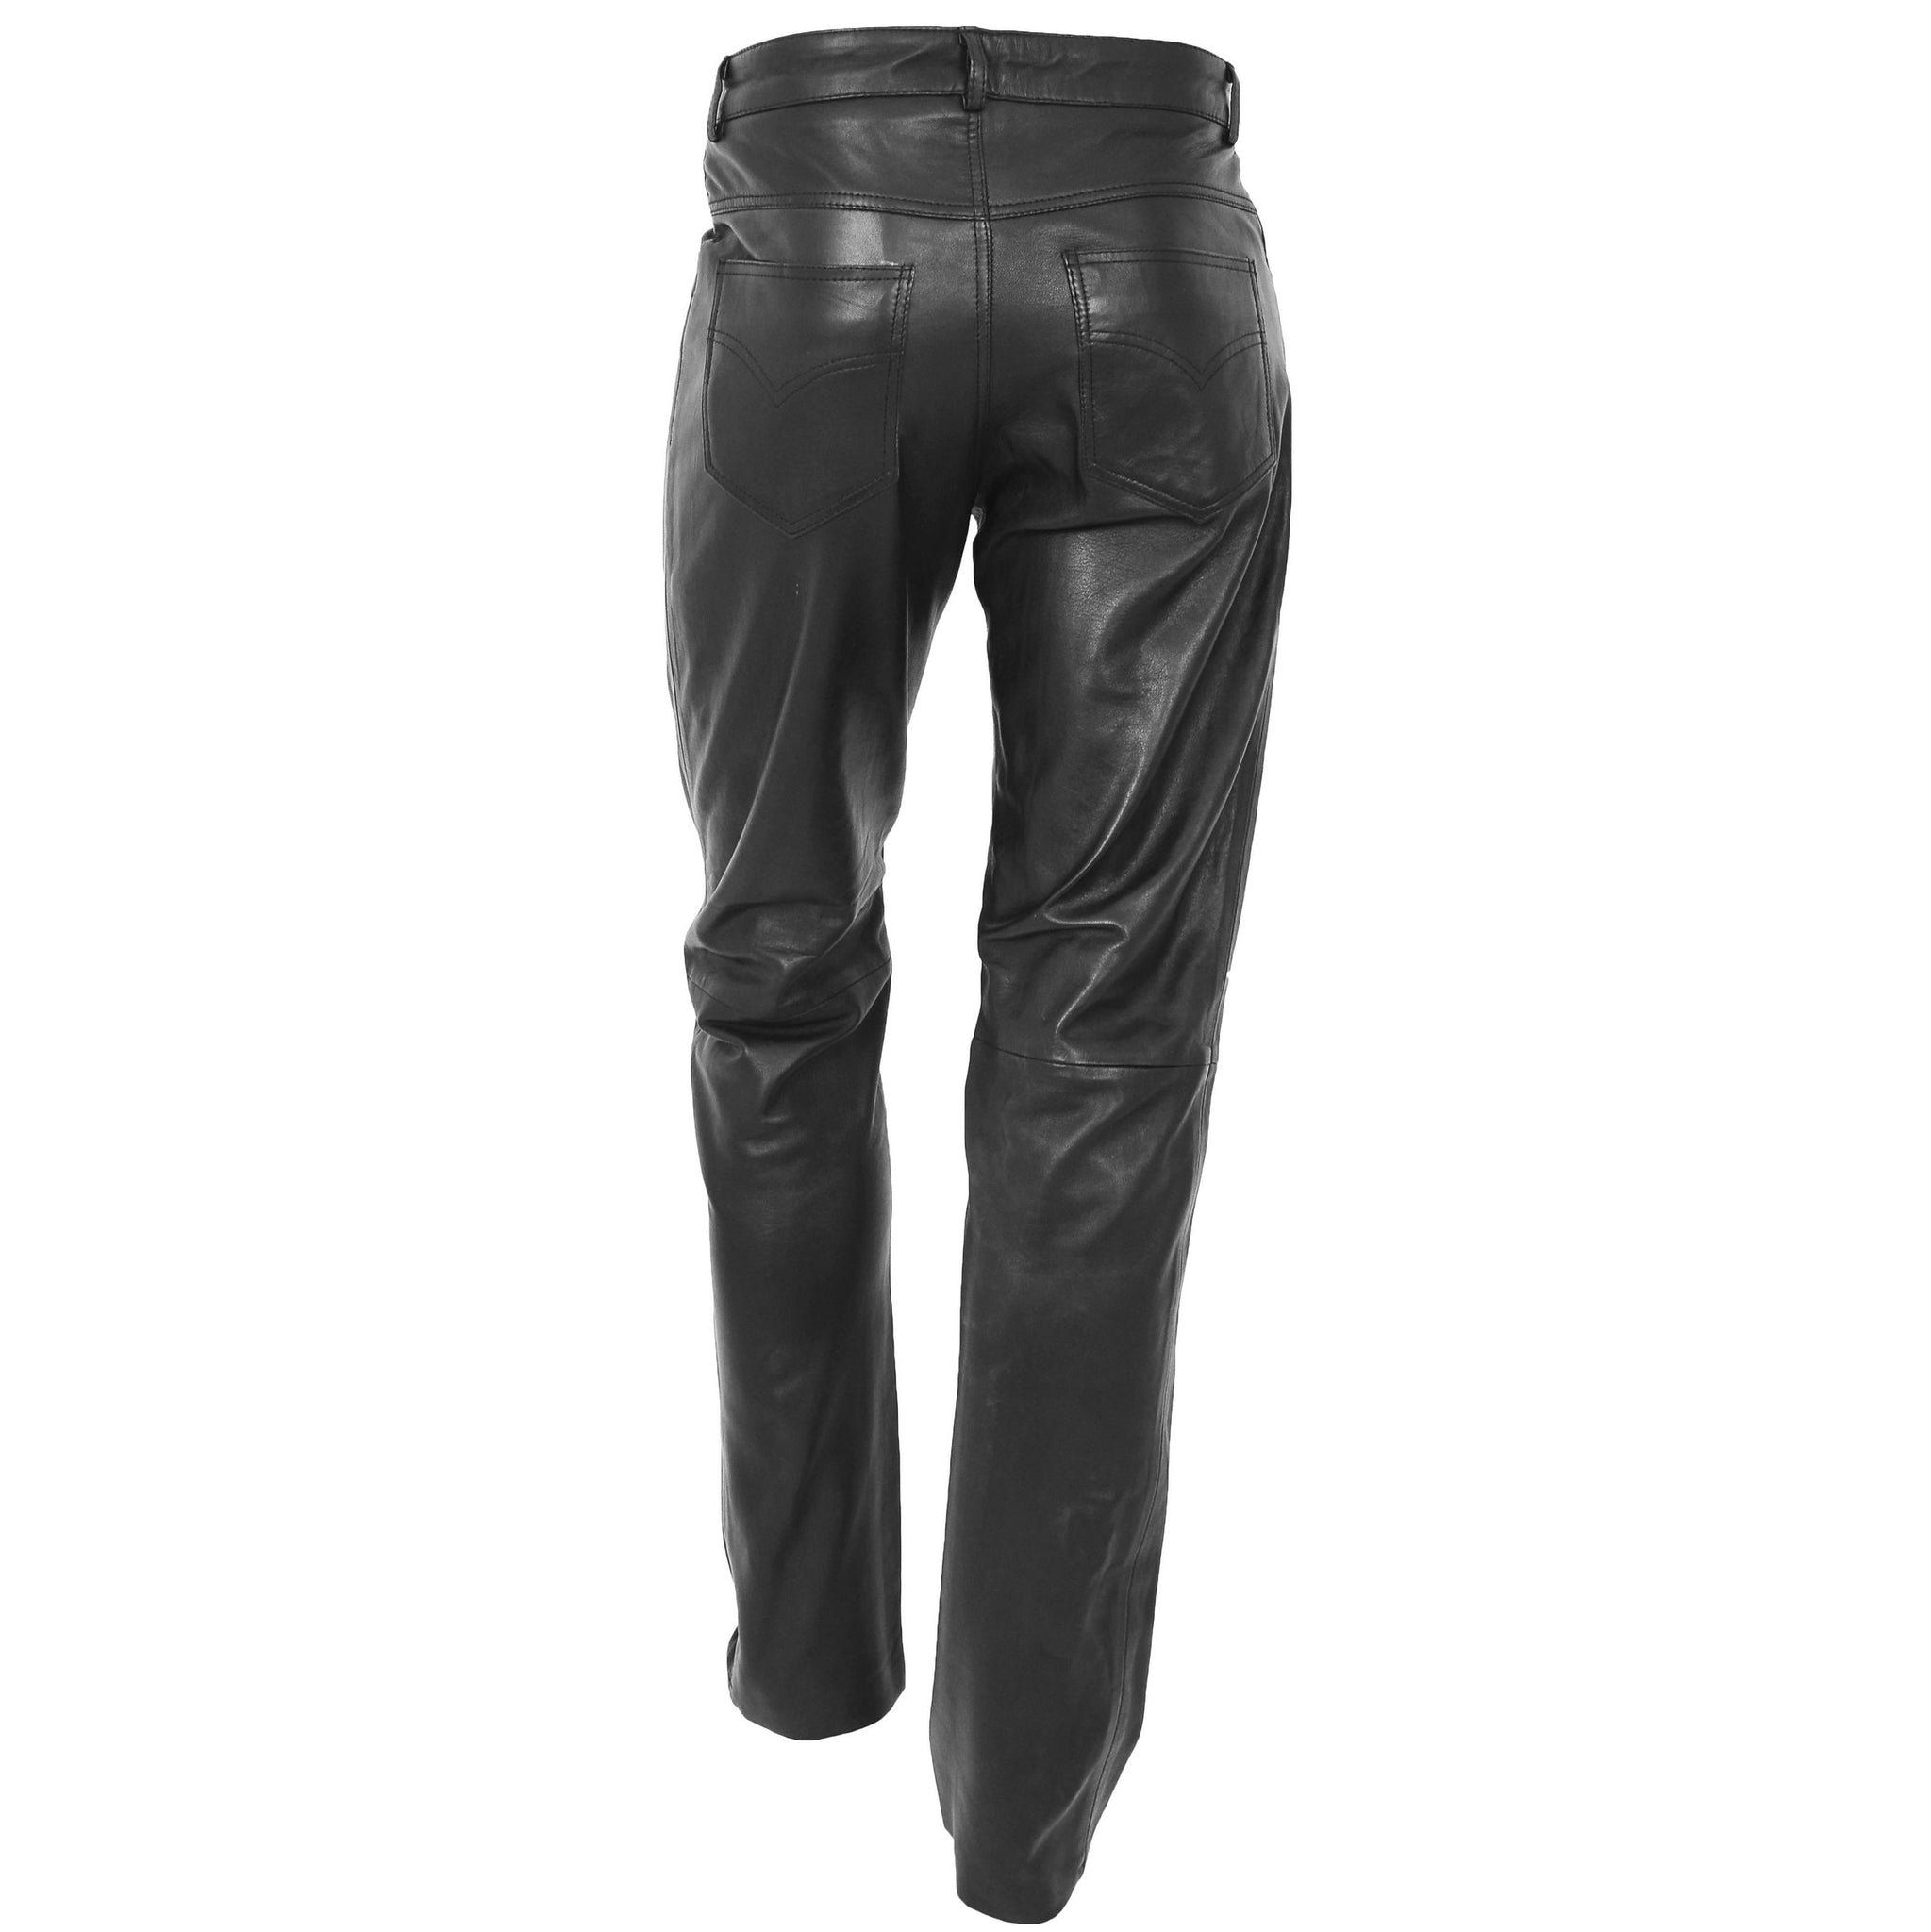 Men's Genuine Leather Jeans pants – Leather Right